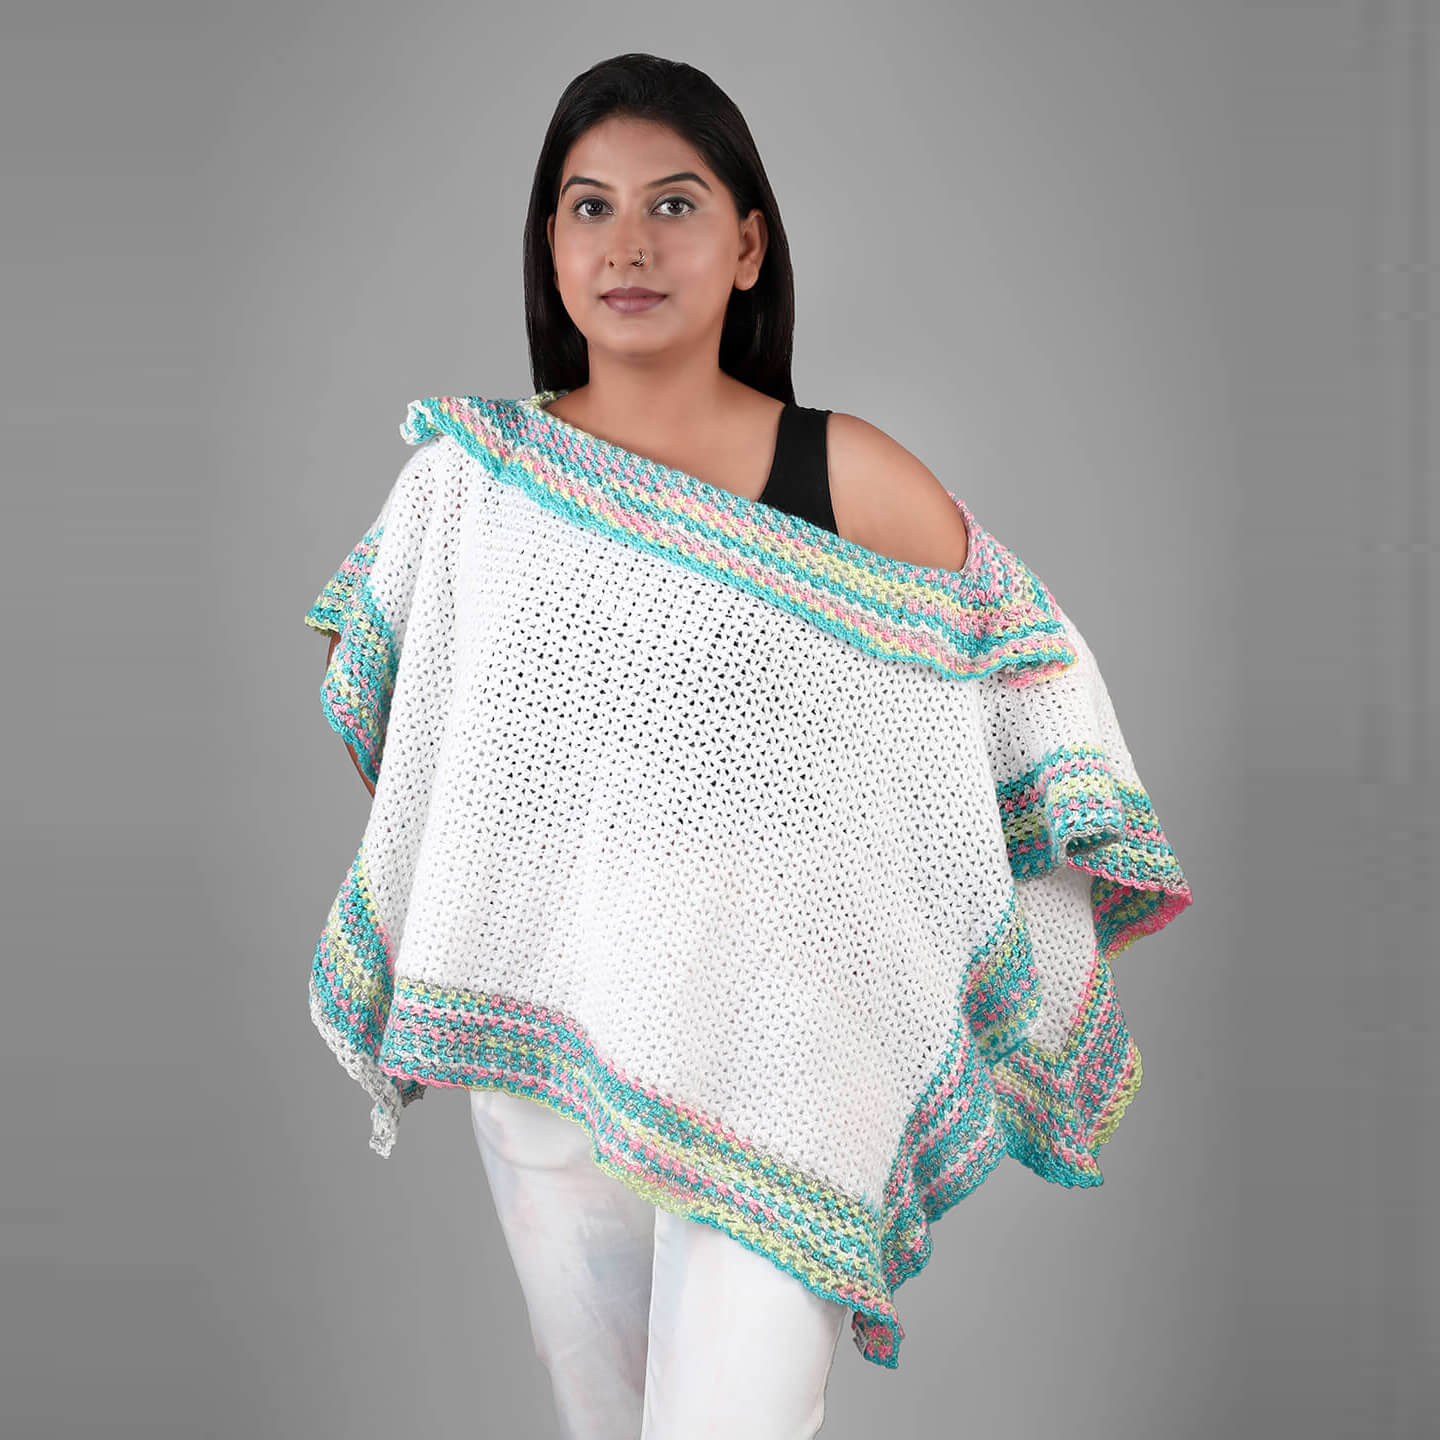 Handmade White and Pastel Colored Multi way Poncho - 3325